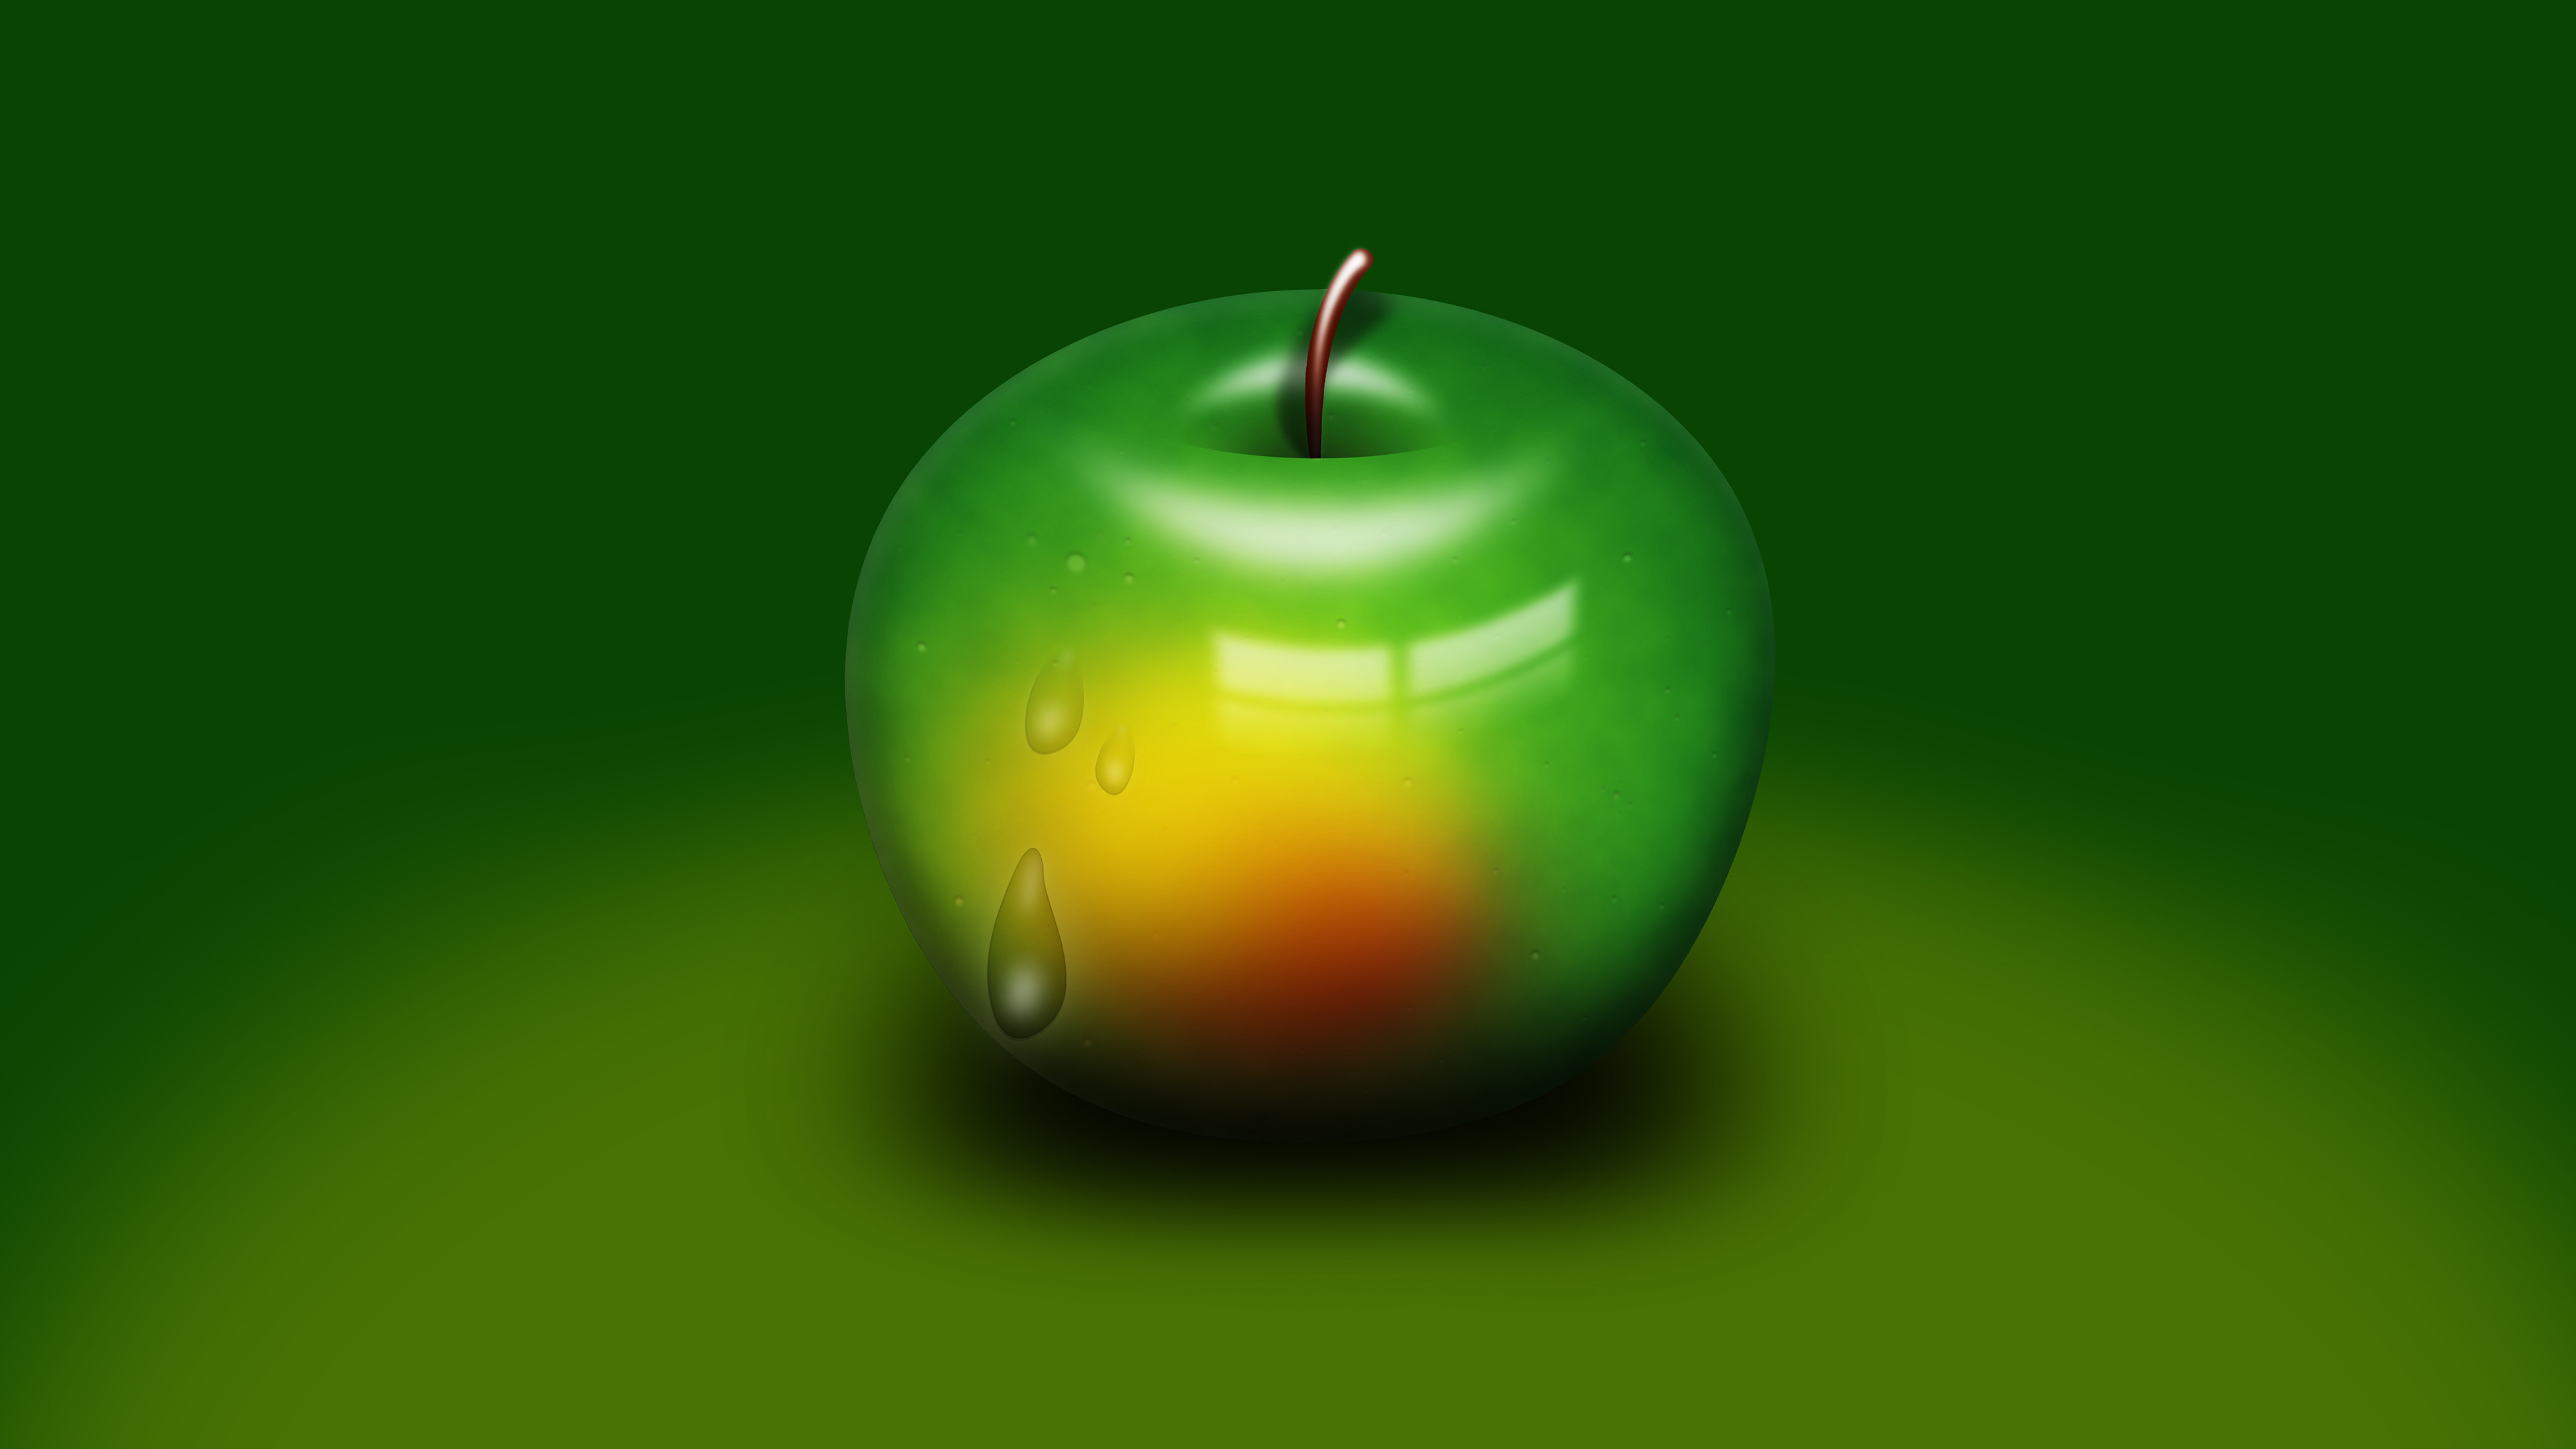 3840x2160 ... wallpapers for chromebook free green apple chromebook wallpaper ready  for ...